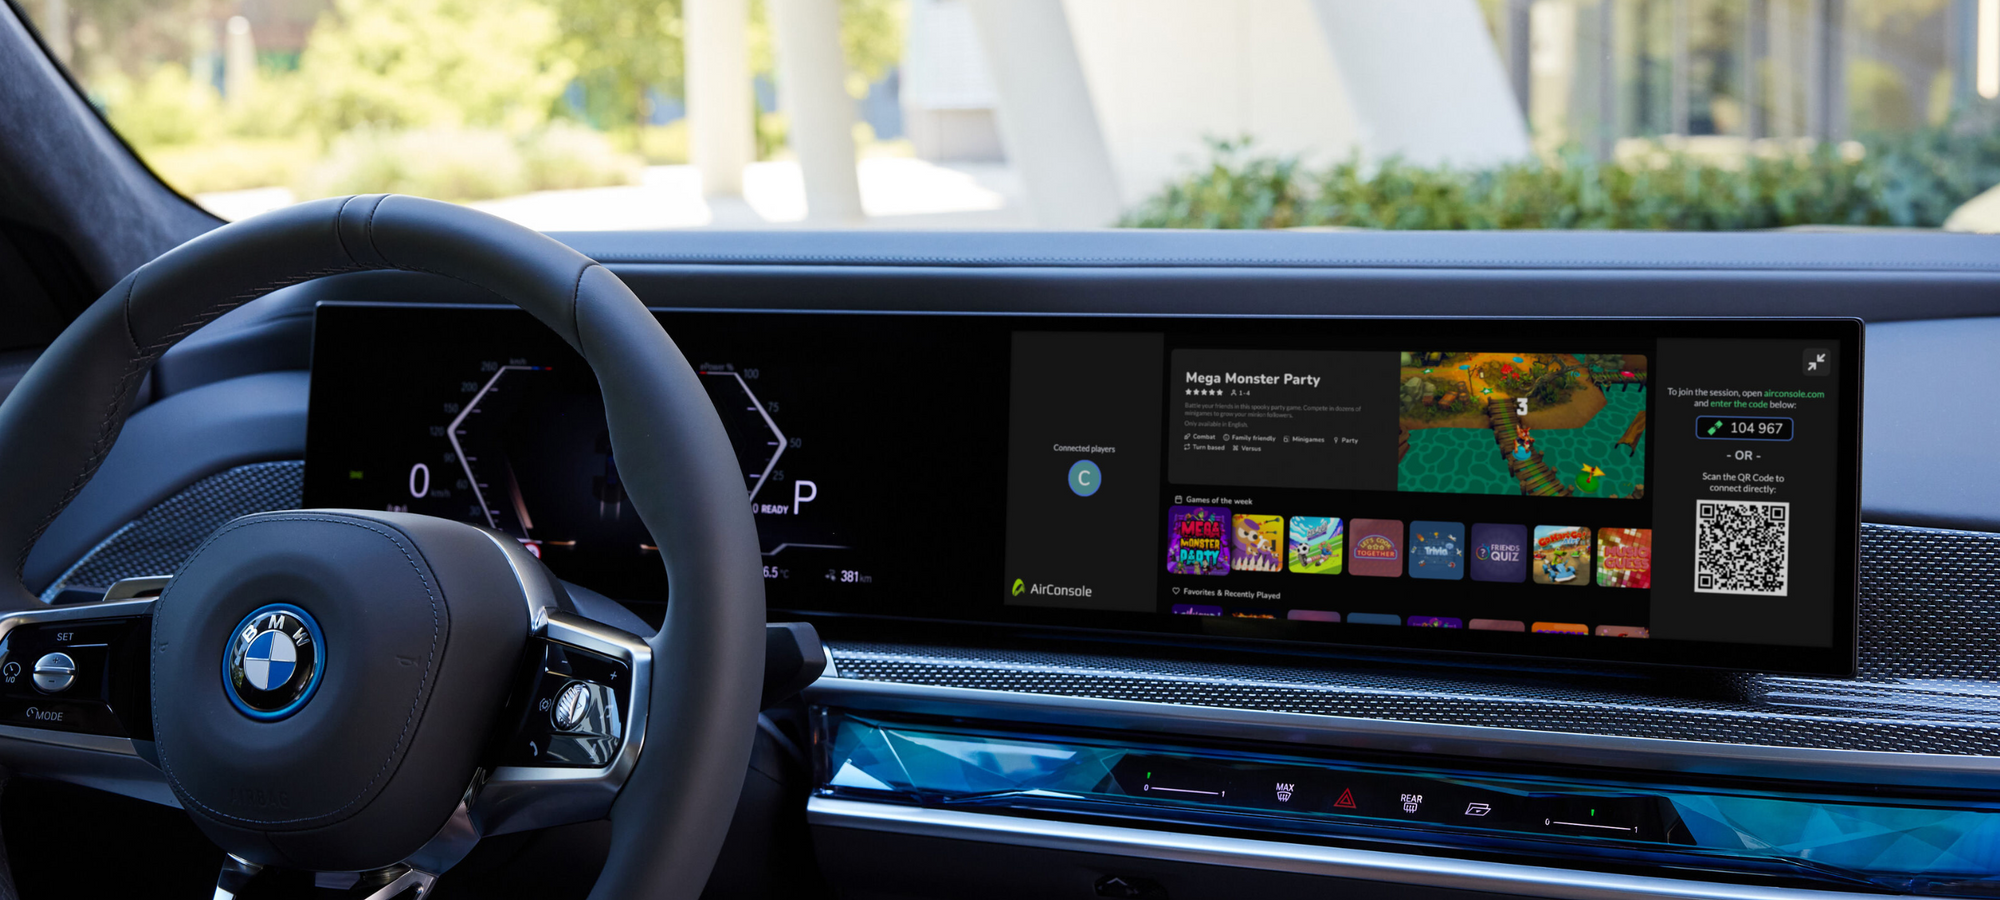 BMW is trying to find a business model for their new in-car massive screens